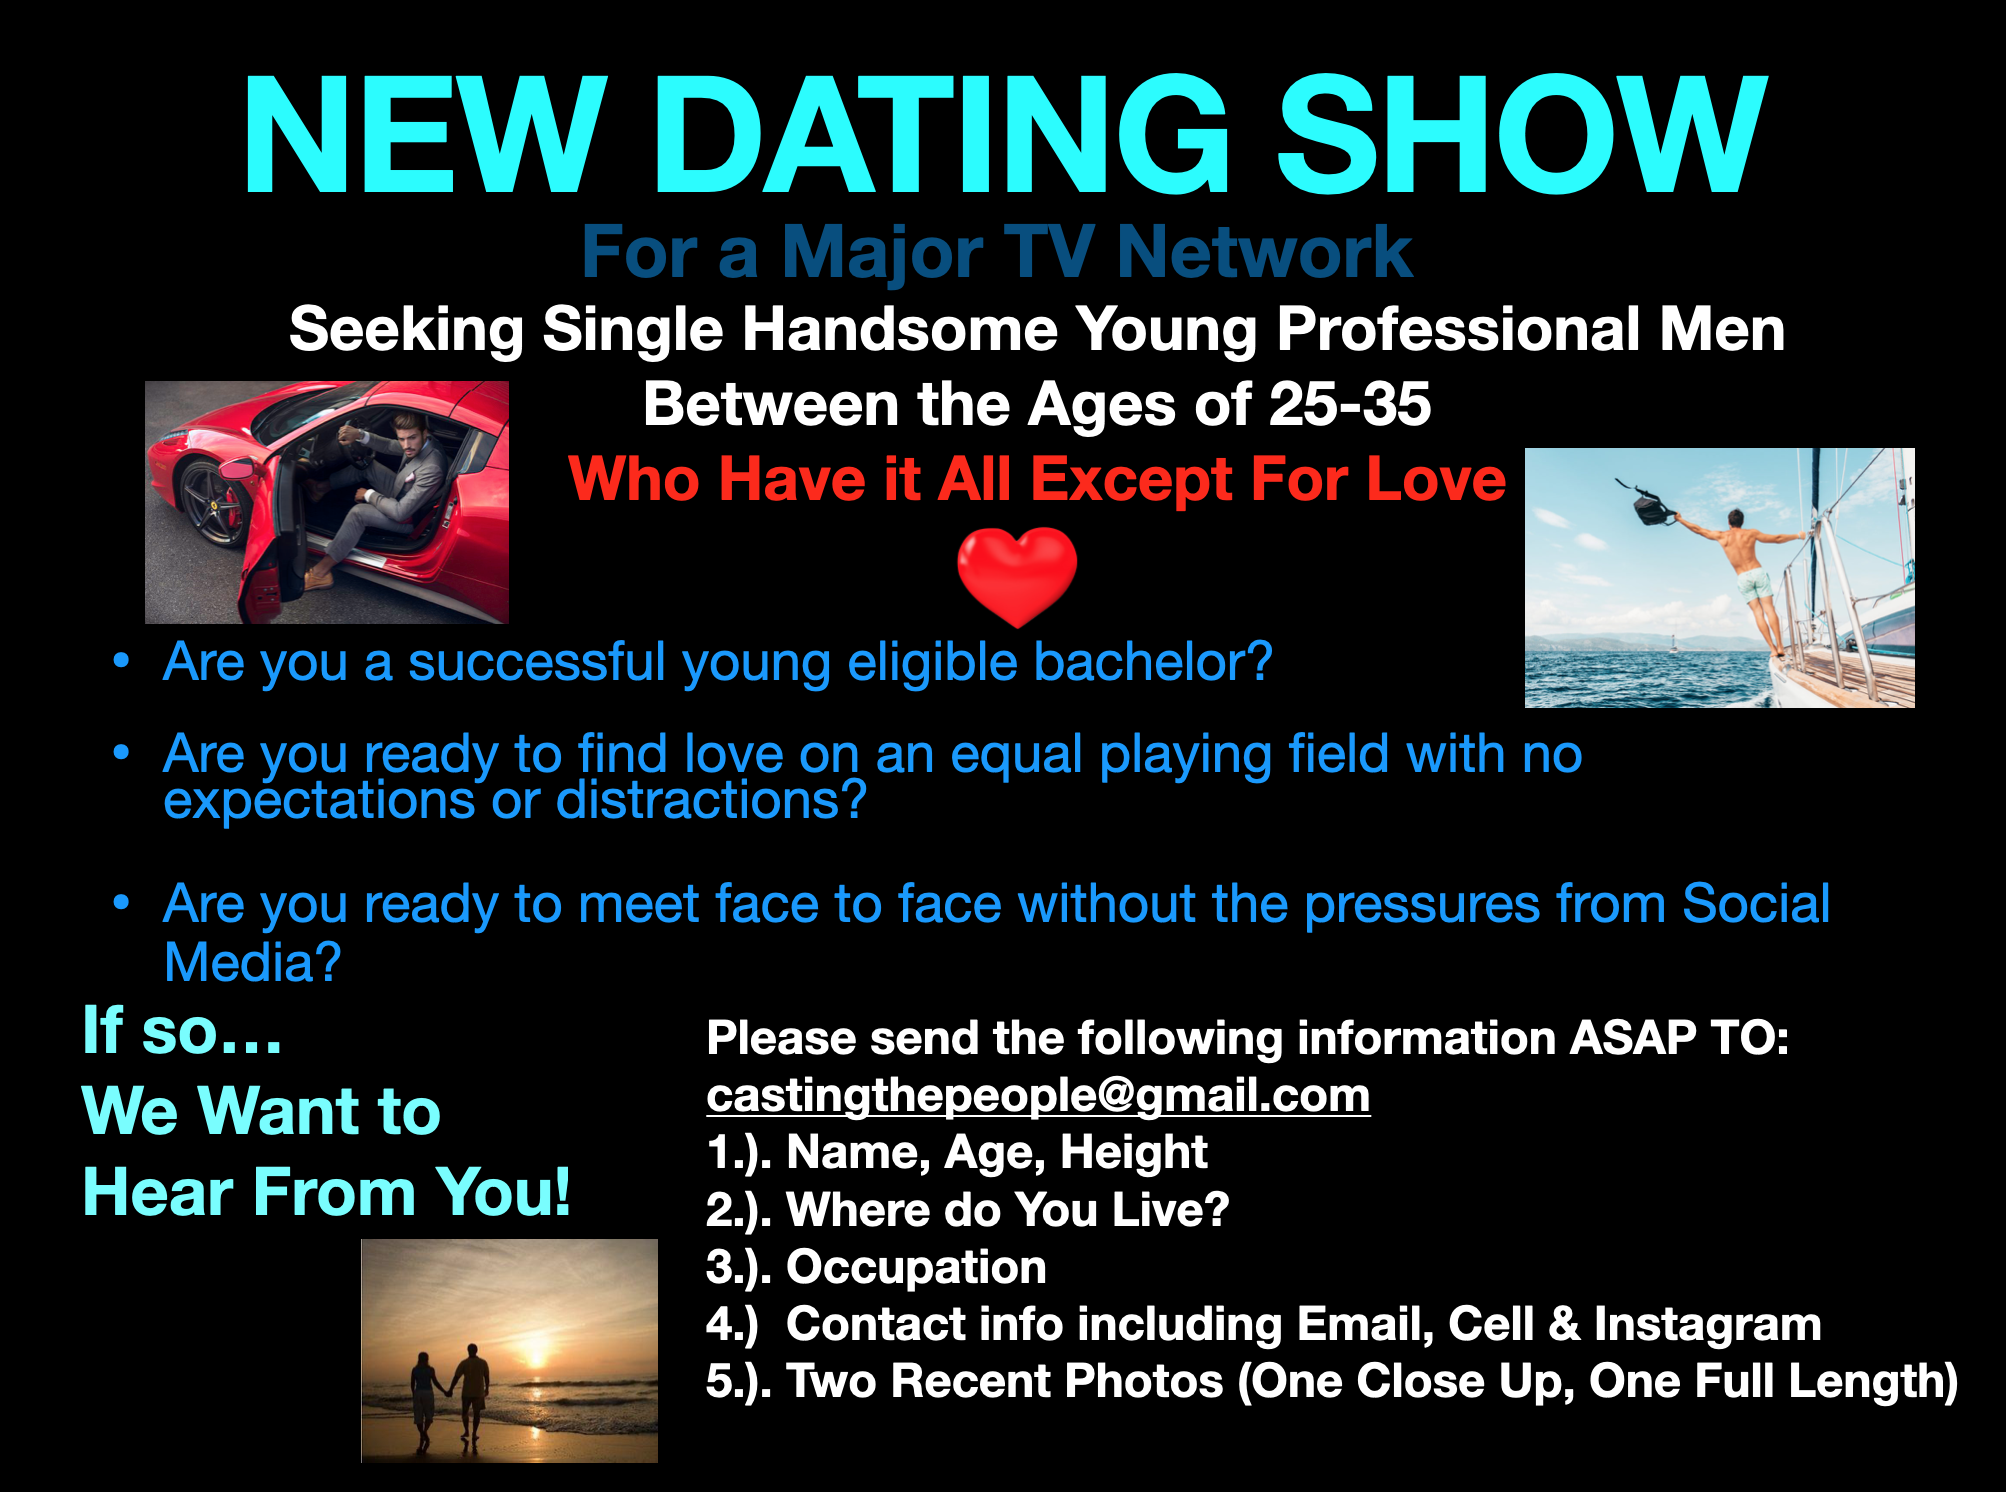 Casting Call for Single Men To Be on a New Reality Dating Show